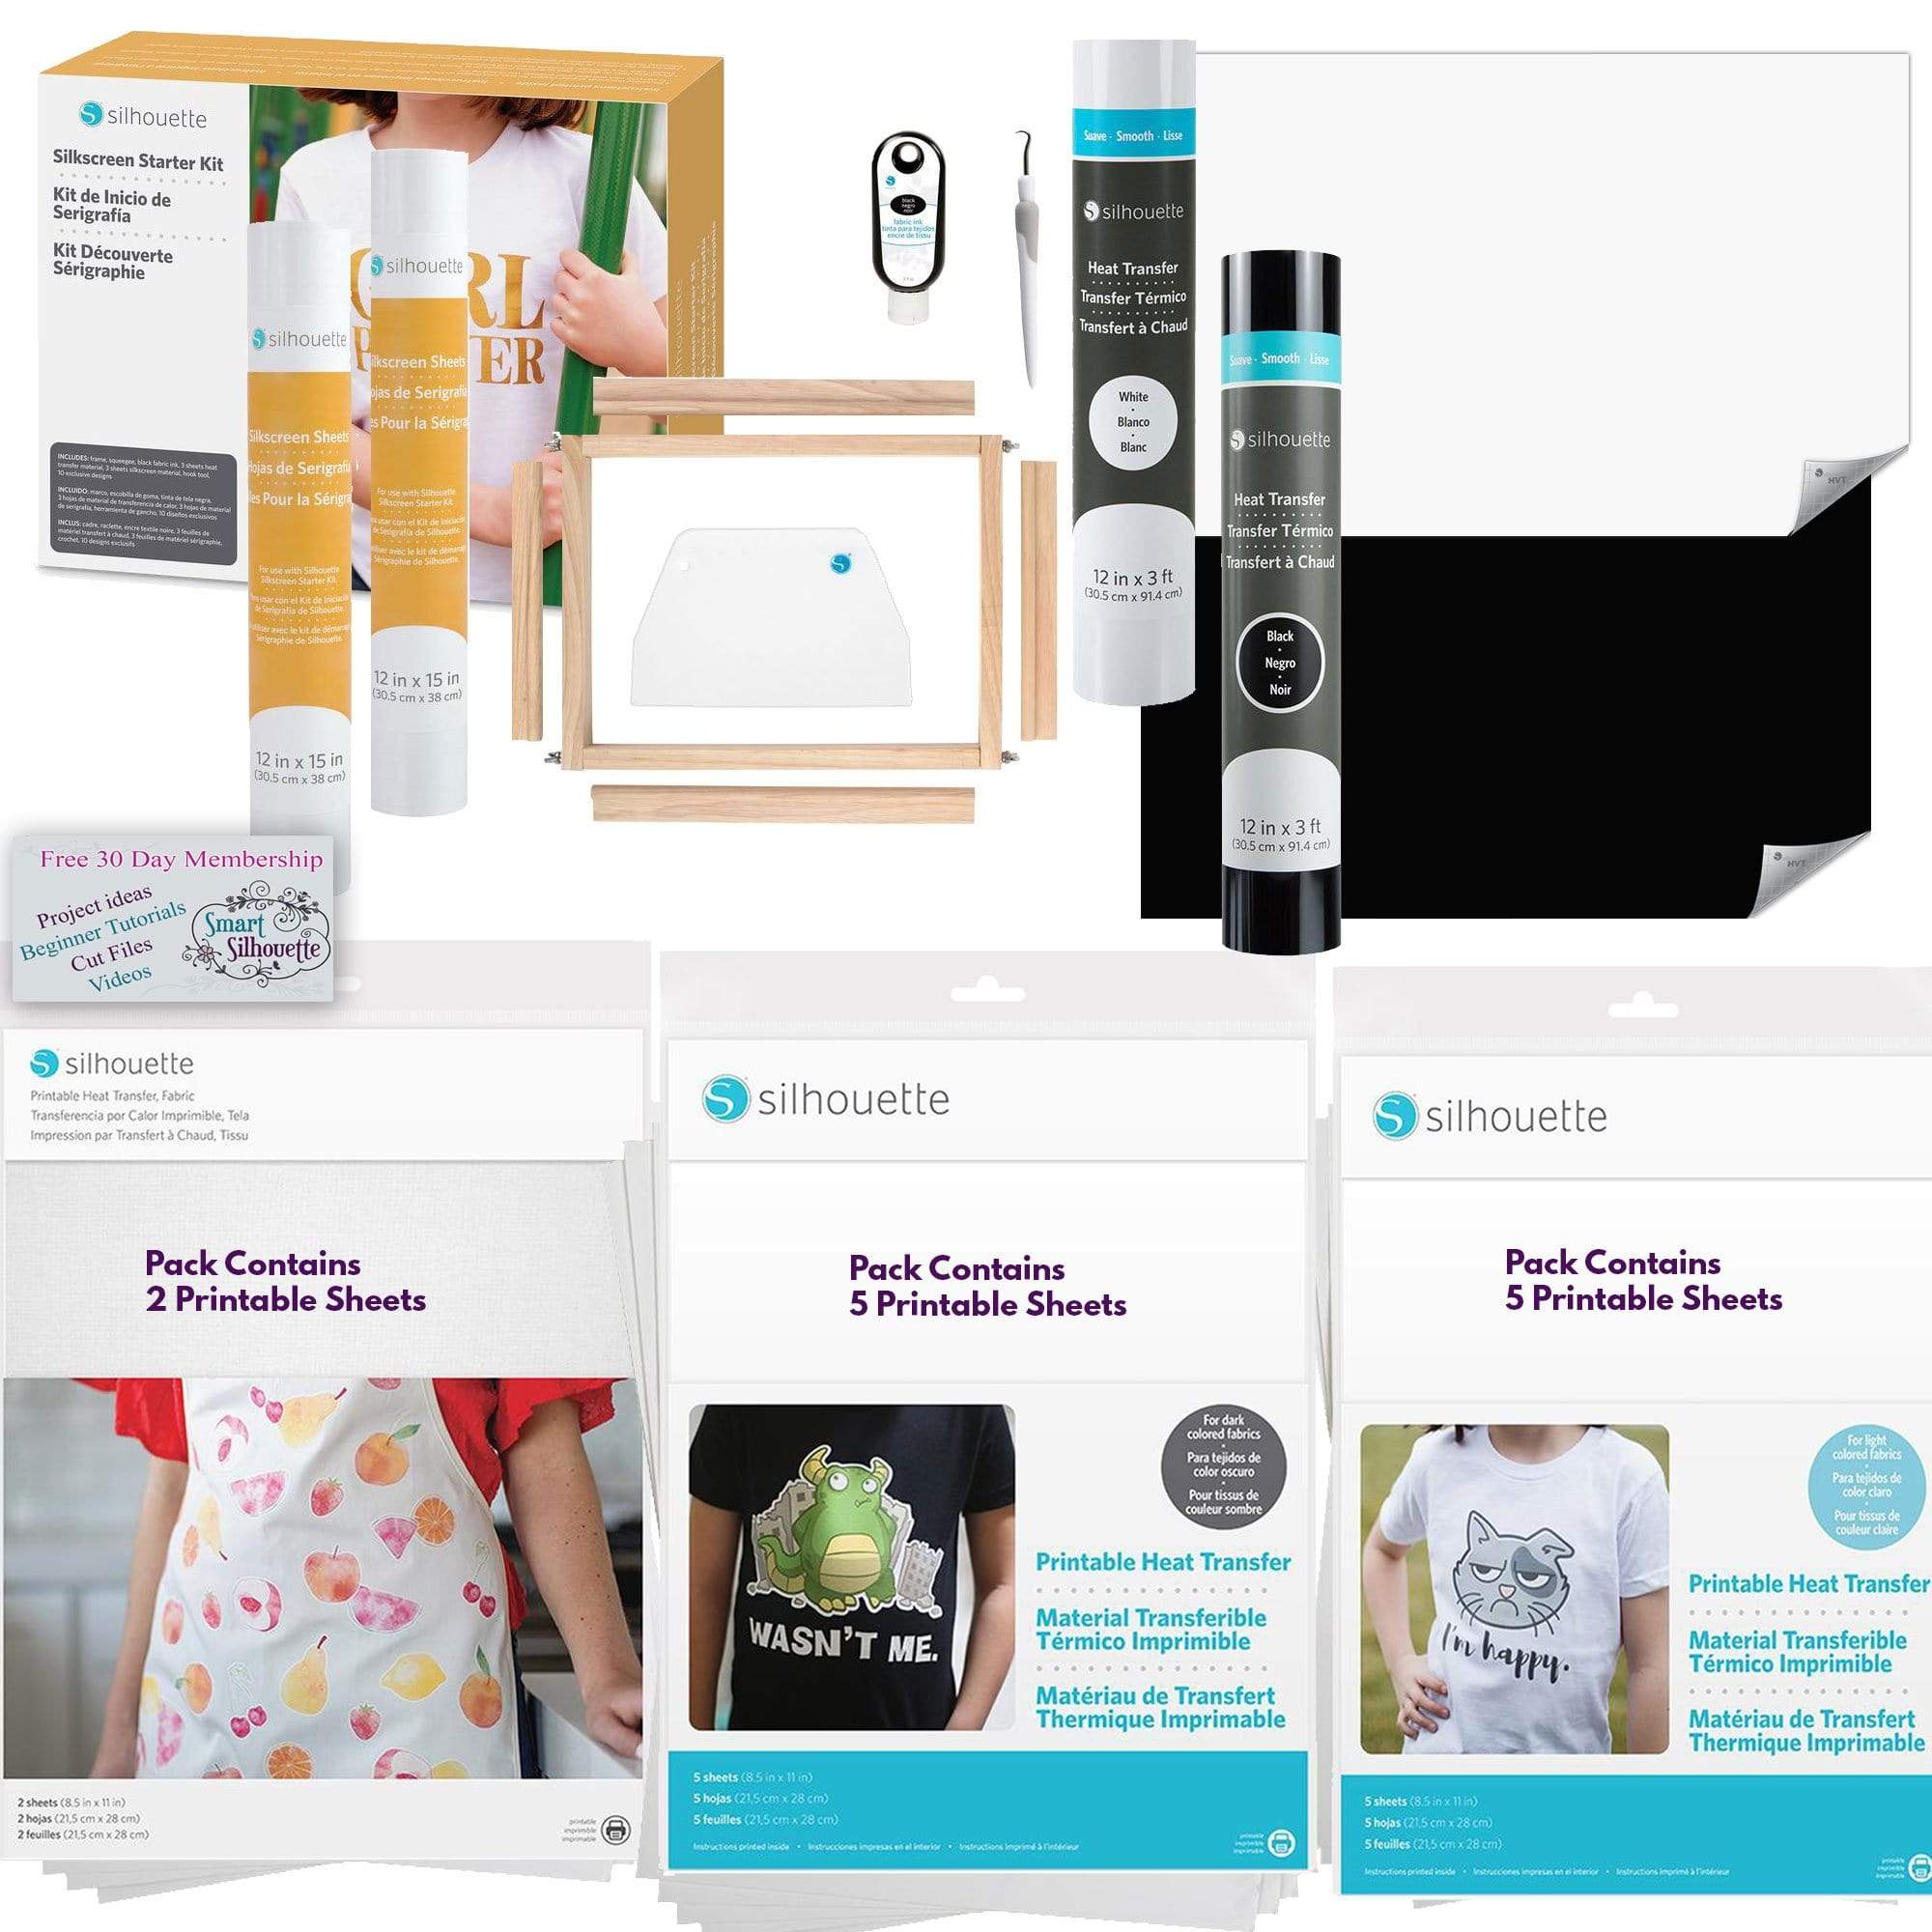 Silhouette America Heat Transfer Materials Silhouette Creative T-Shirts Bundle includes Silkscreen Starter Kit with Extra sheets, Printable Heat Transfer Material, 2 Rolls of Heat Transfer Material and a 30 Day Trial to Smart-Silhouette